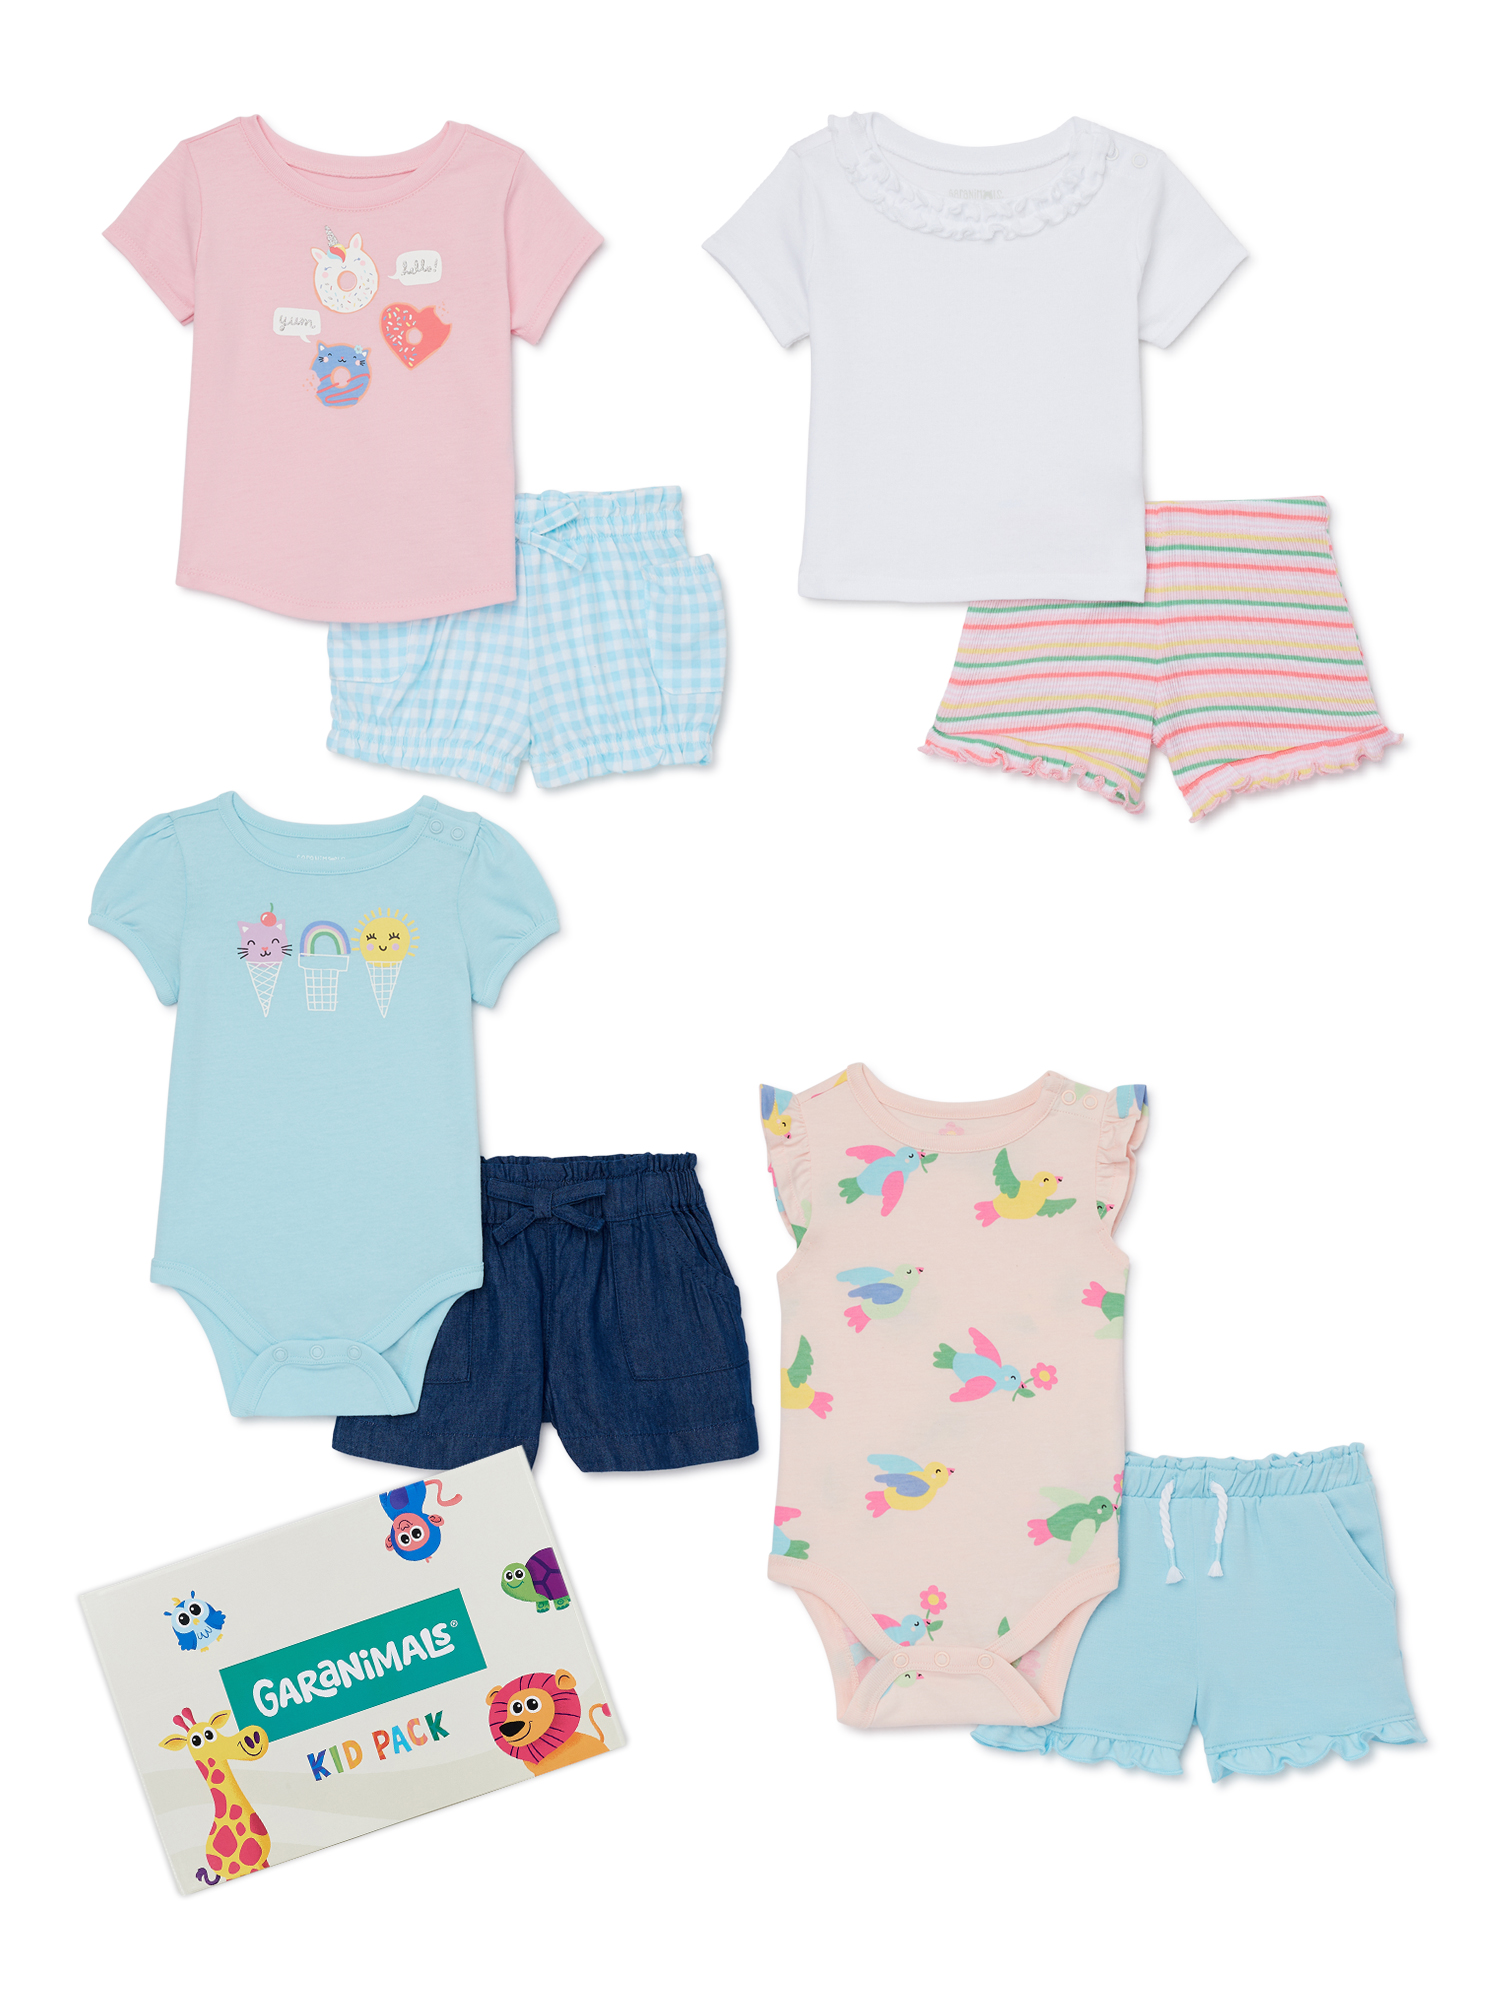 Garanimals Baby Girl Mix and Match Outfit Kid-Pack, 8-Piece, Sizes 0-24 Months - image 1 of 8